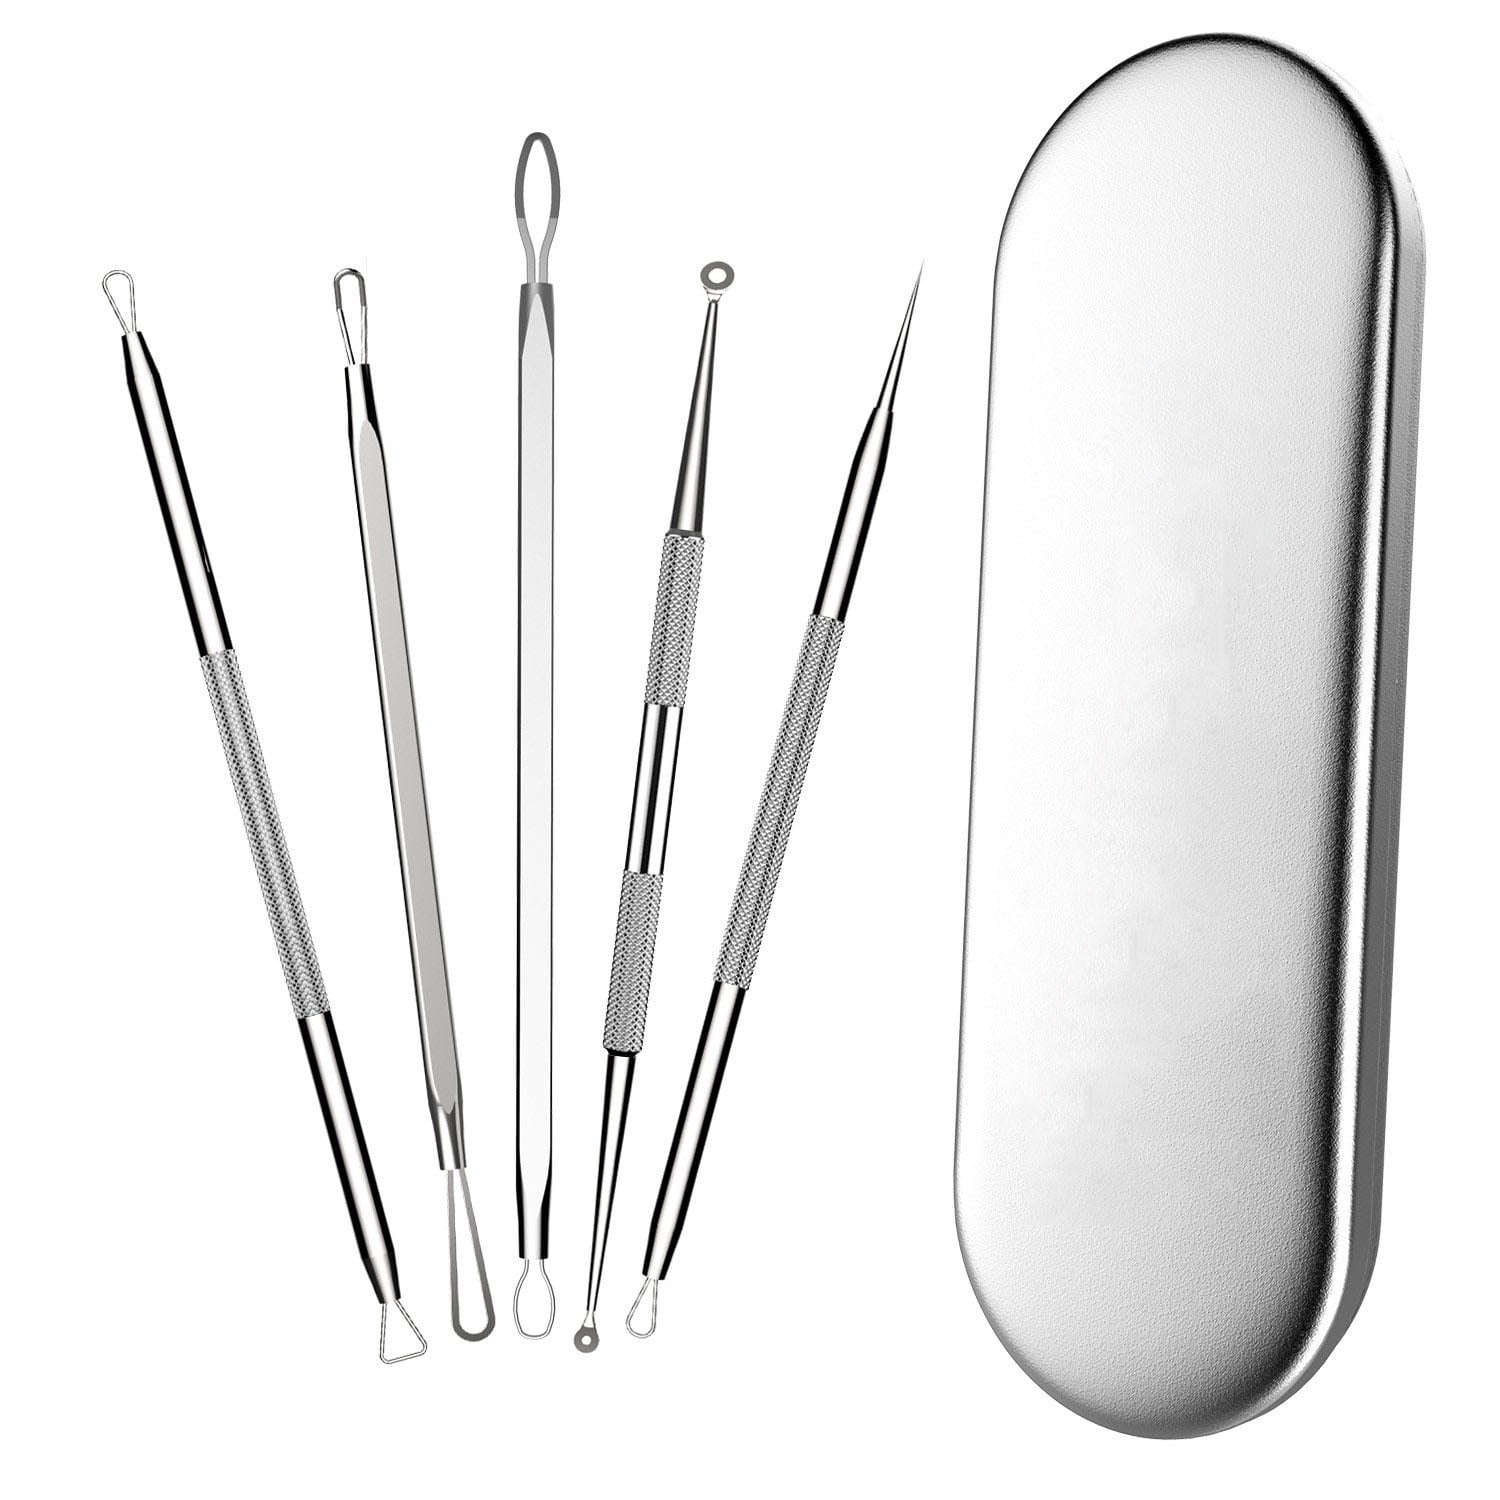 Blackhead Whitehead Pimple Spot Comedone Acne Extractor Remover Popper Tool Kit 